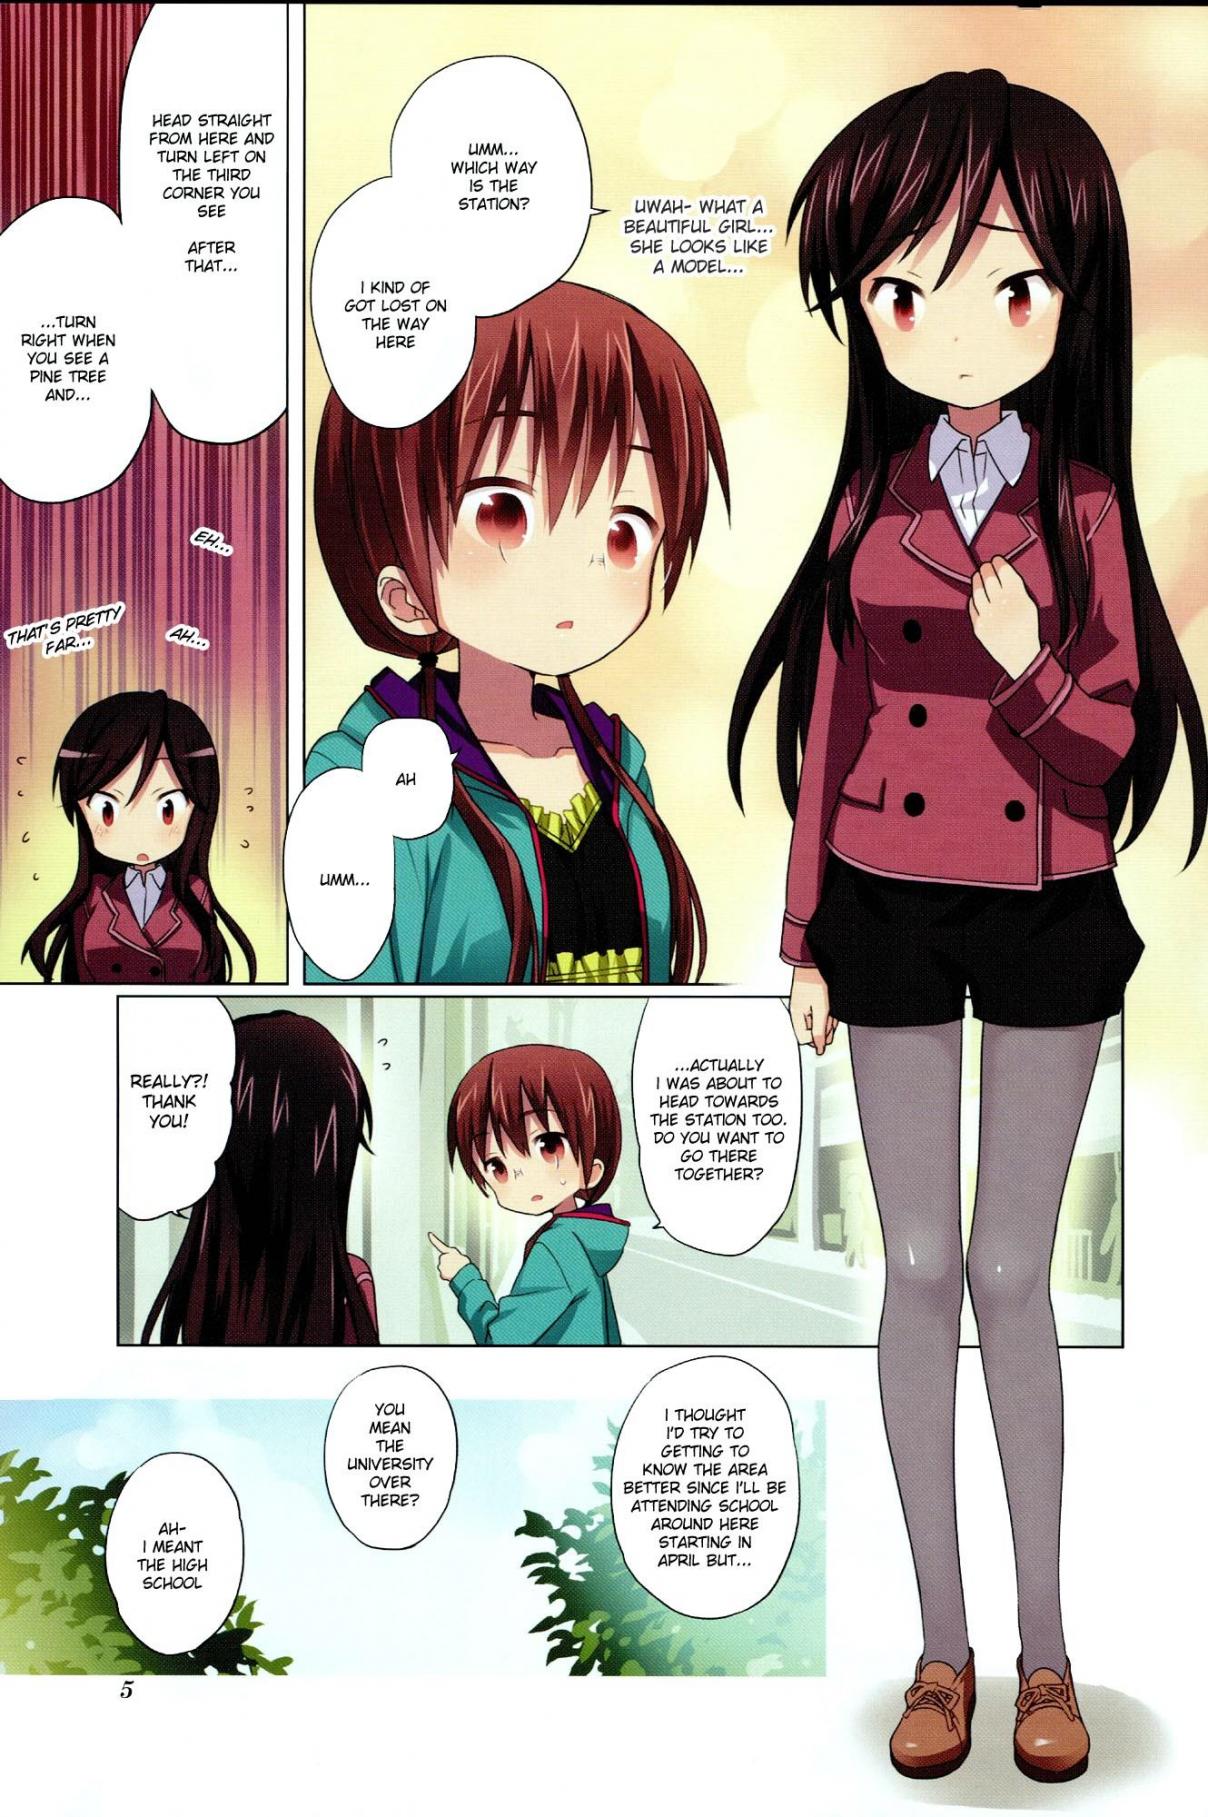 A Channel Vol. 2 Ch. 17.1